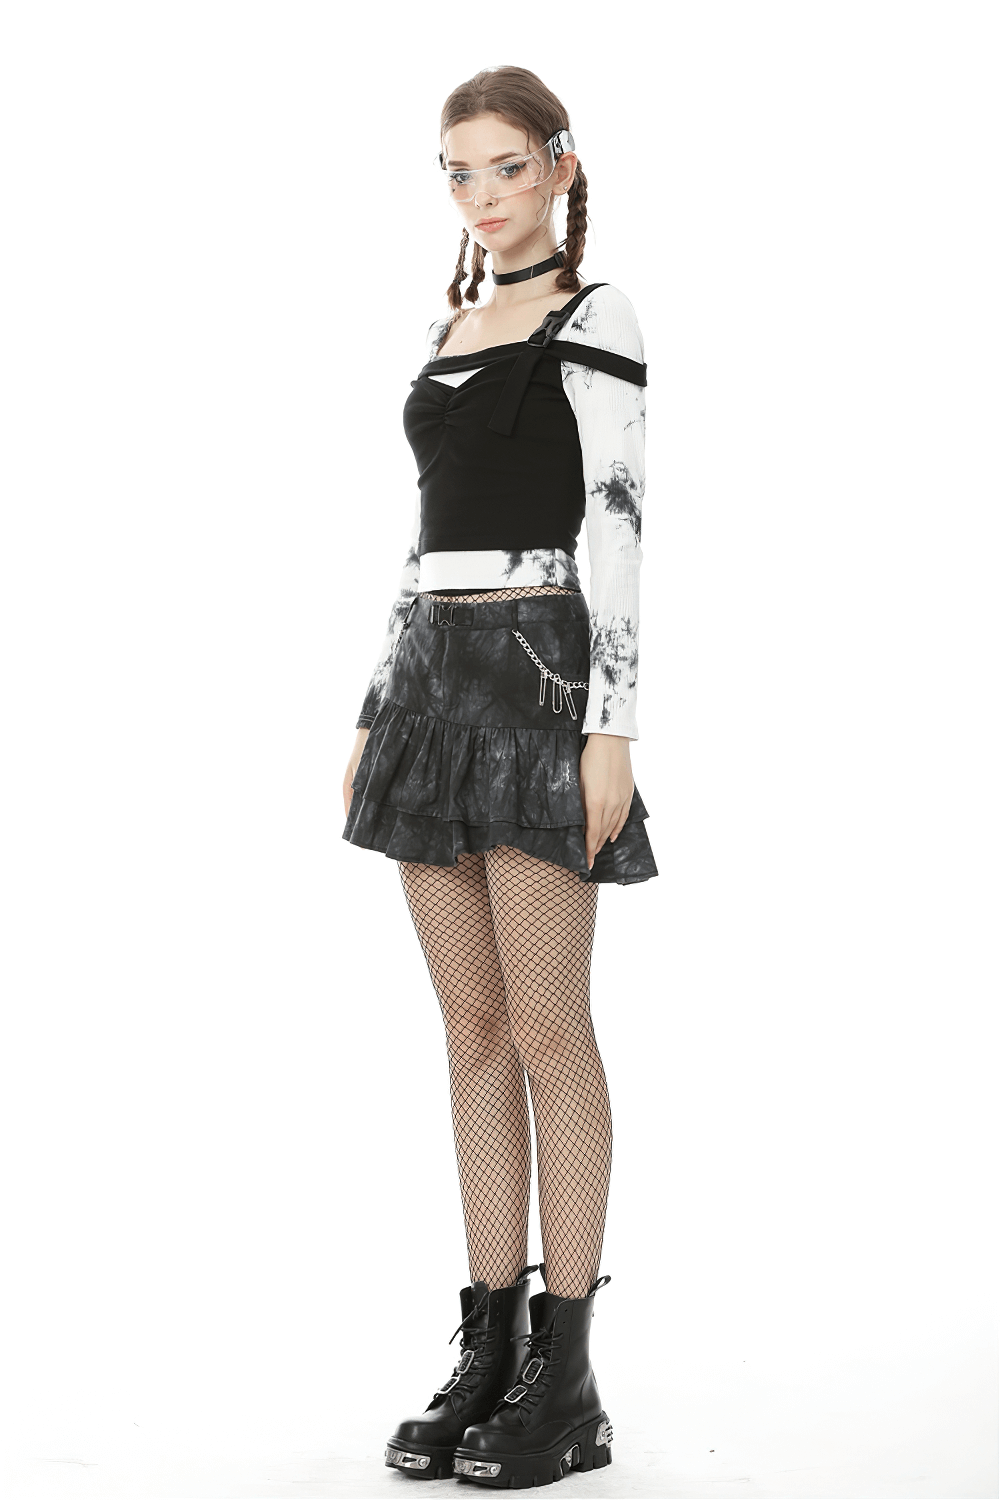 Goth Women's Mini Skirt with Ruffles and Chains